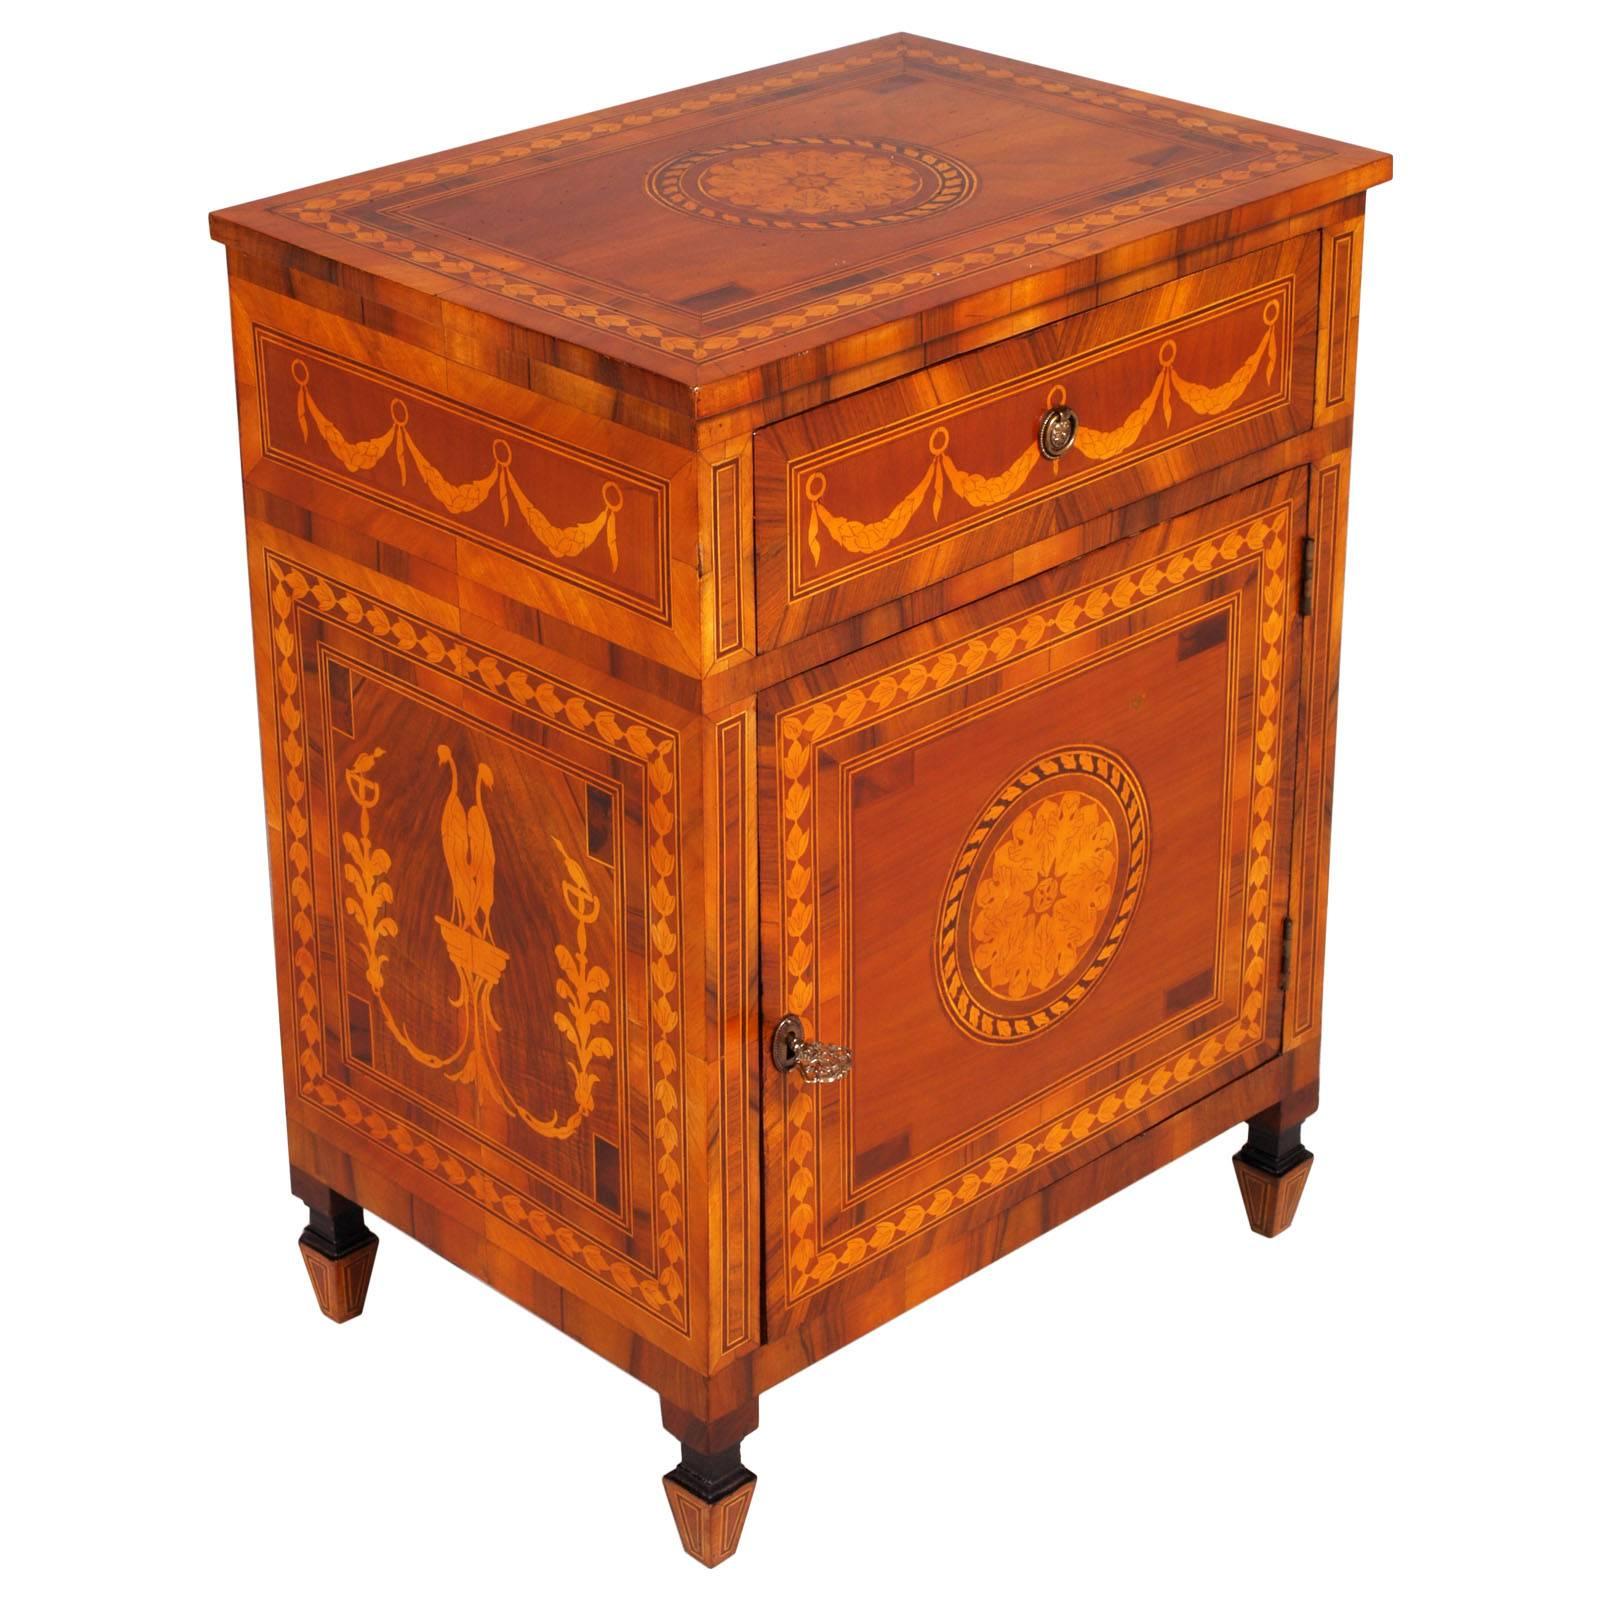 19th century neoclassic Lombard bedside tables, cabinets, Maggiolini style, restored and polished to wax. 
Cabinet richly hand-inlaid with classic geometric designs with walnut and maple wood
Rare unavailable furniture of this kind

Measures cm: